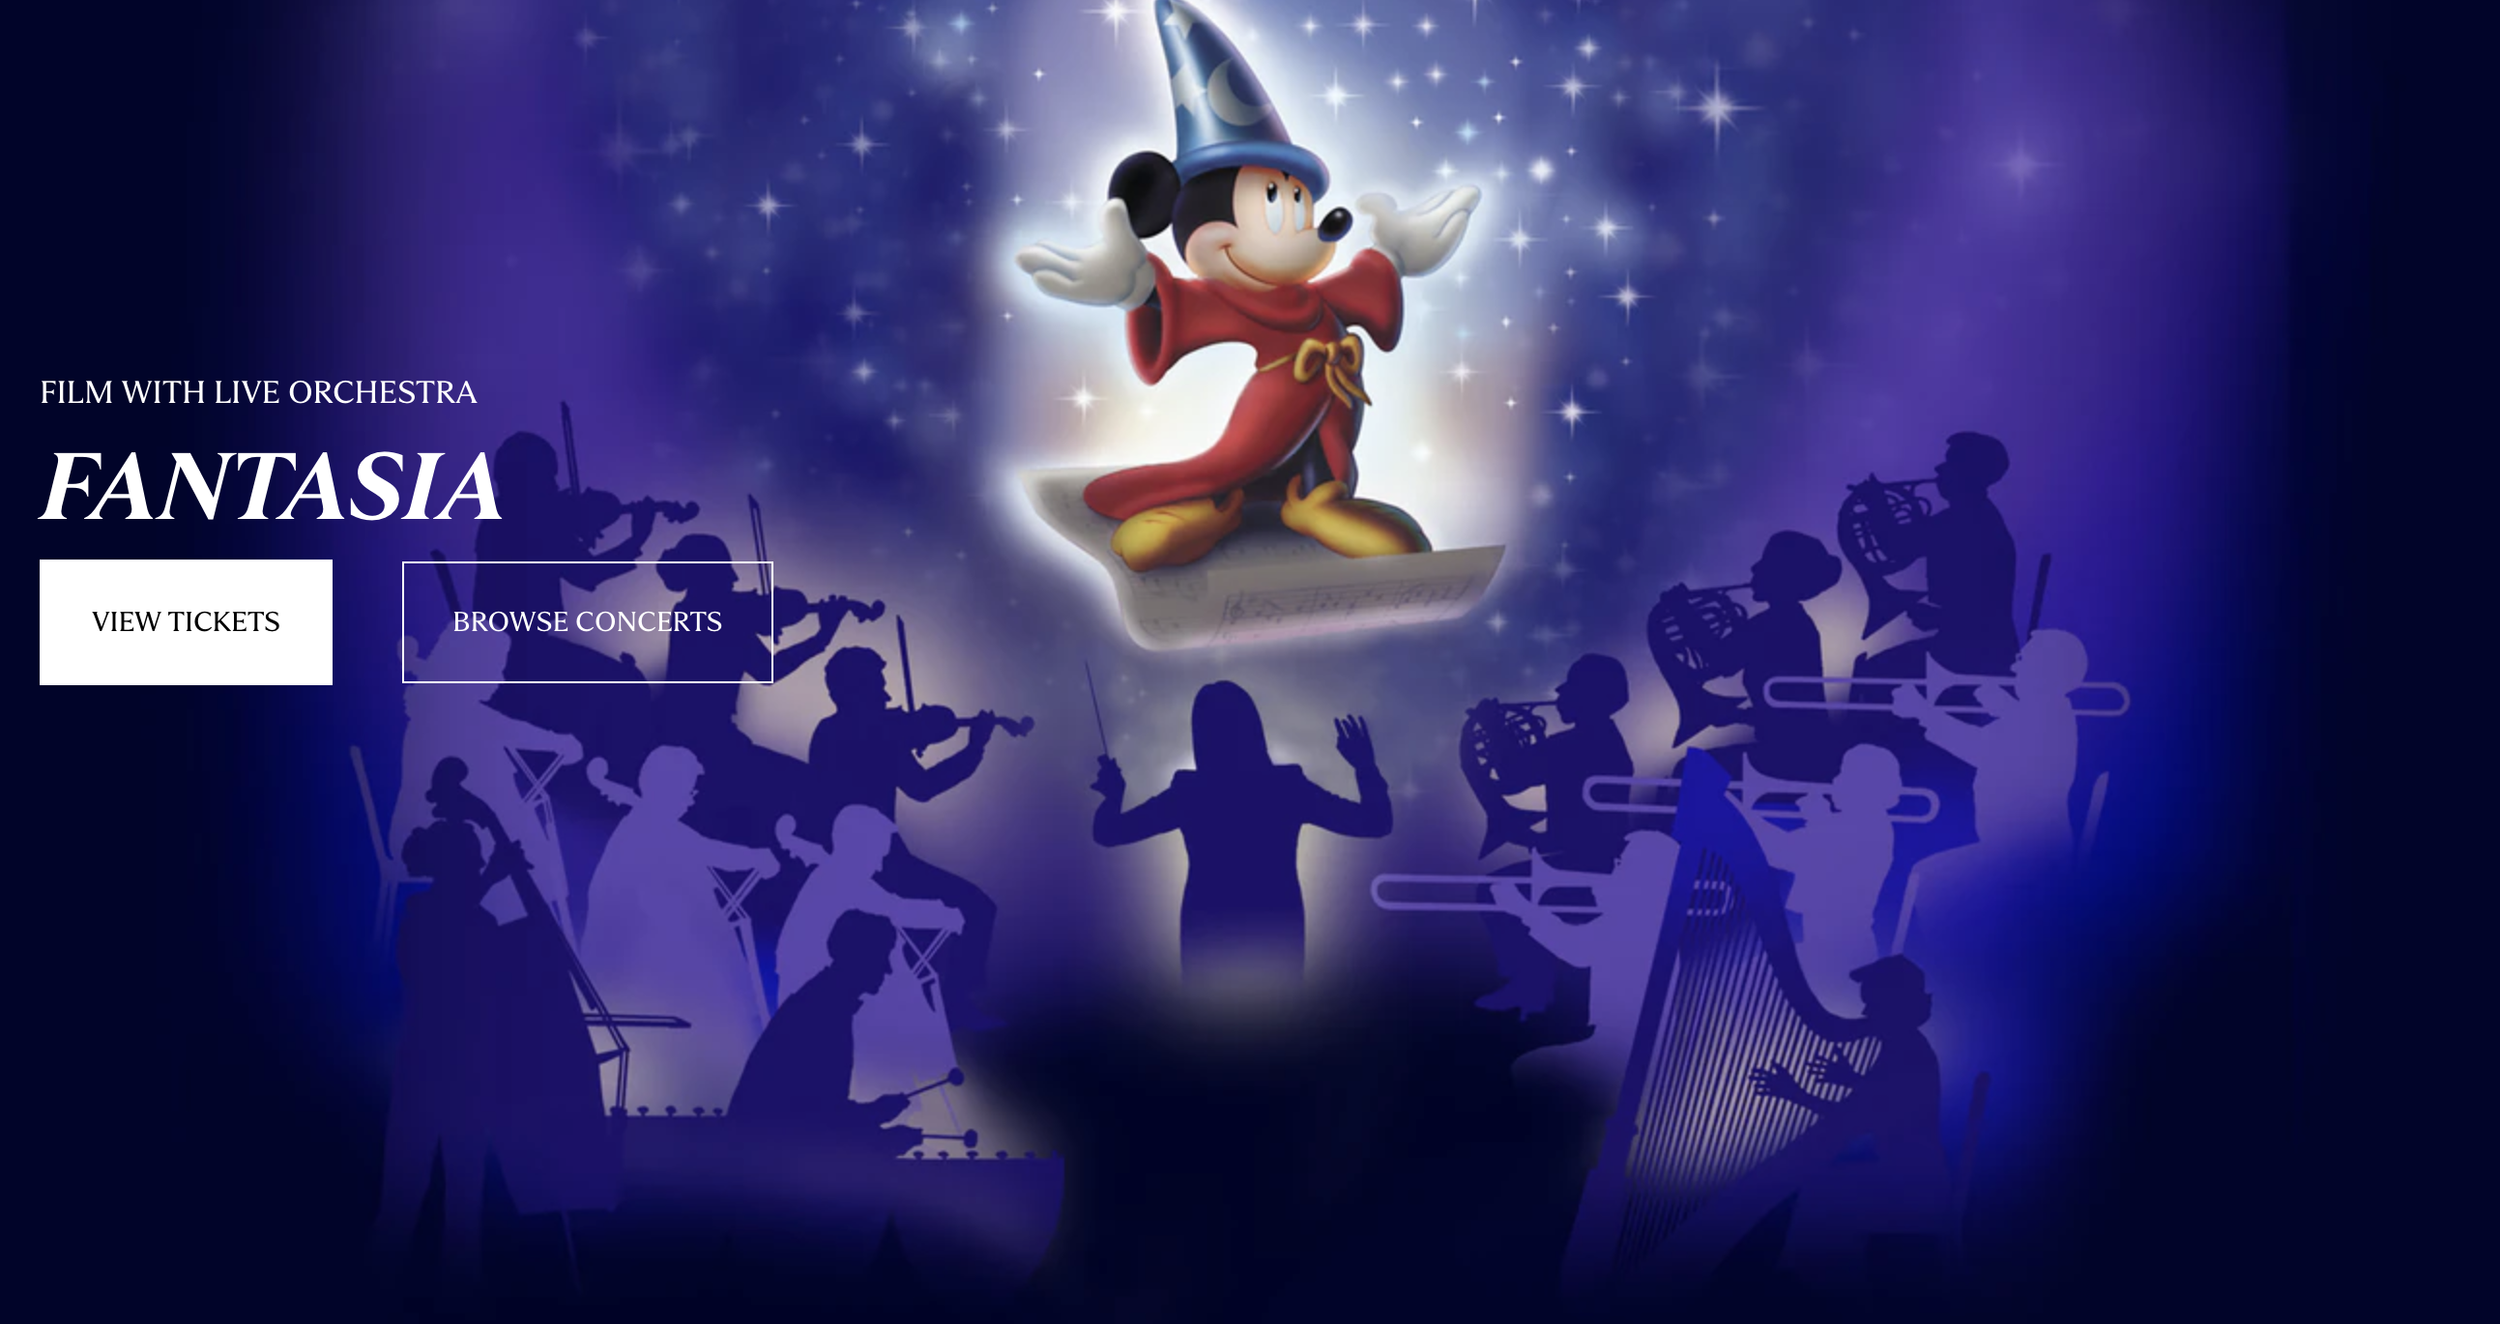 Film with Live Orchestra: Fantasia — Ronnie's Awesome List